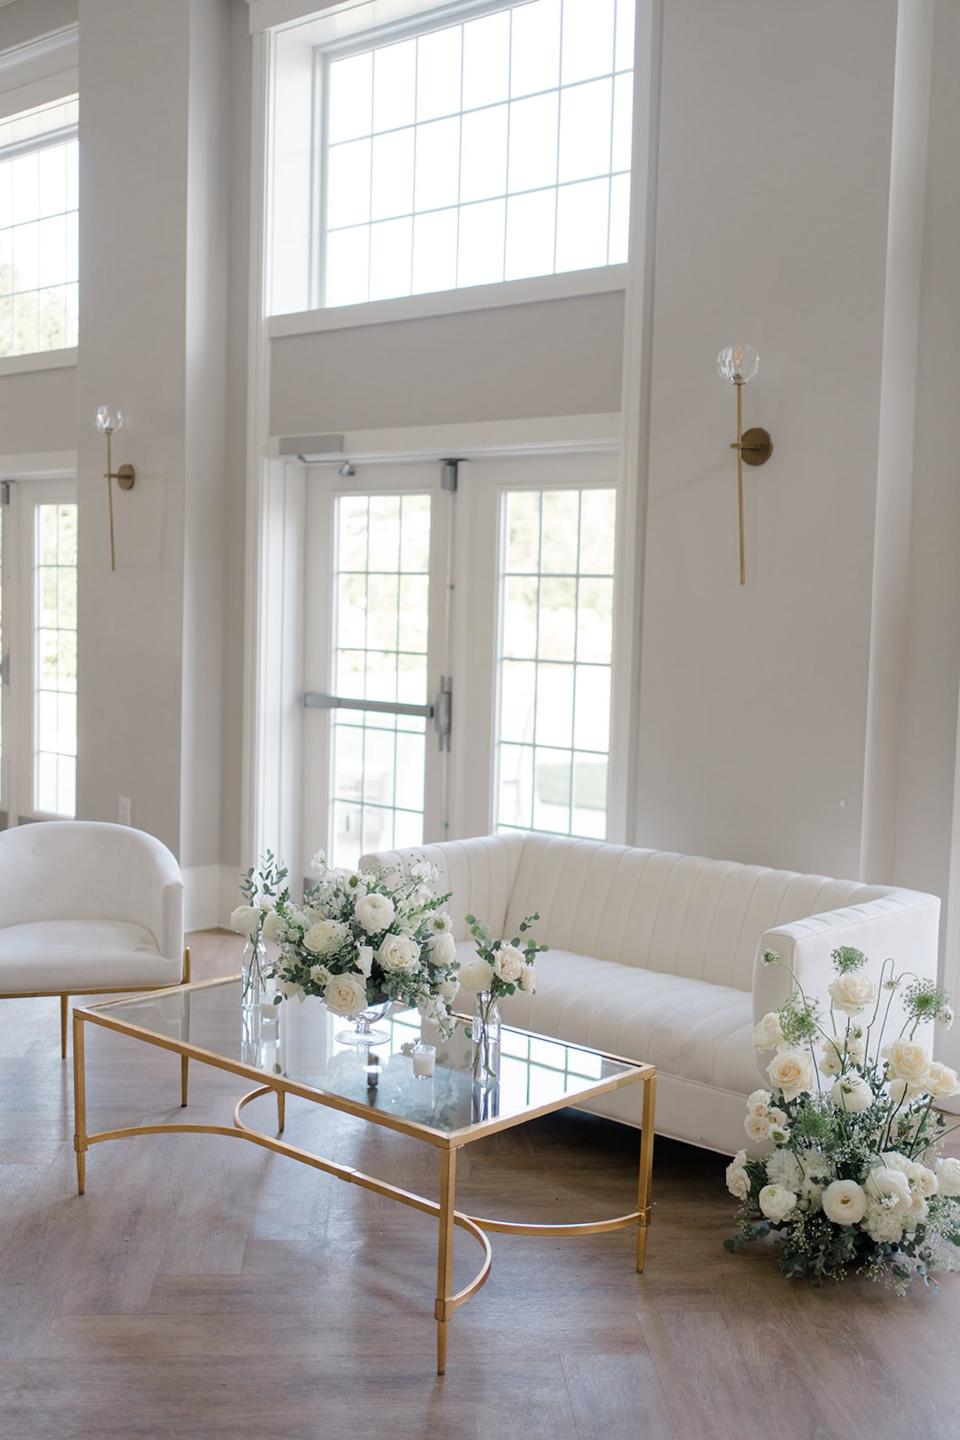 A white couch and chair with a glass table in front of it. Flowers sit on the table and next to the couch.